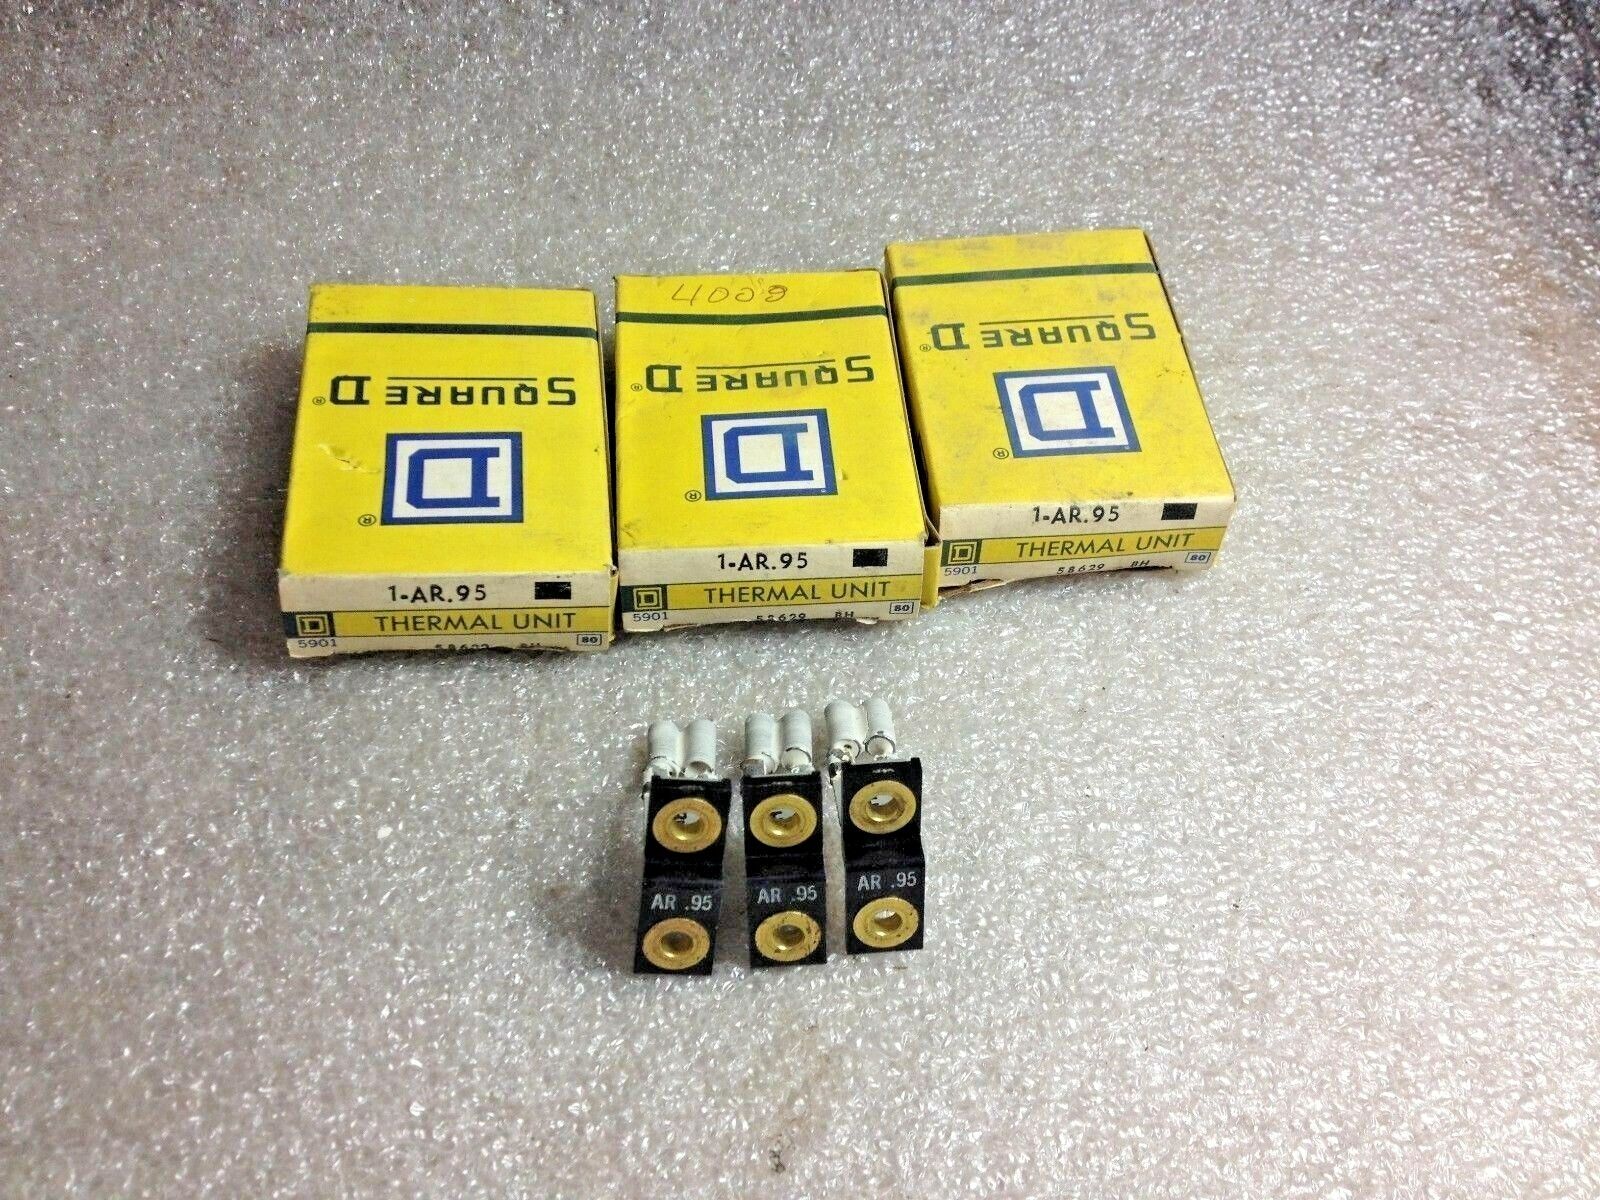 3 Square D 1.AR.95 Heaters